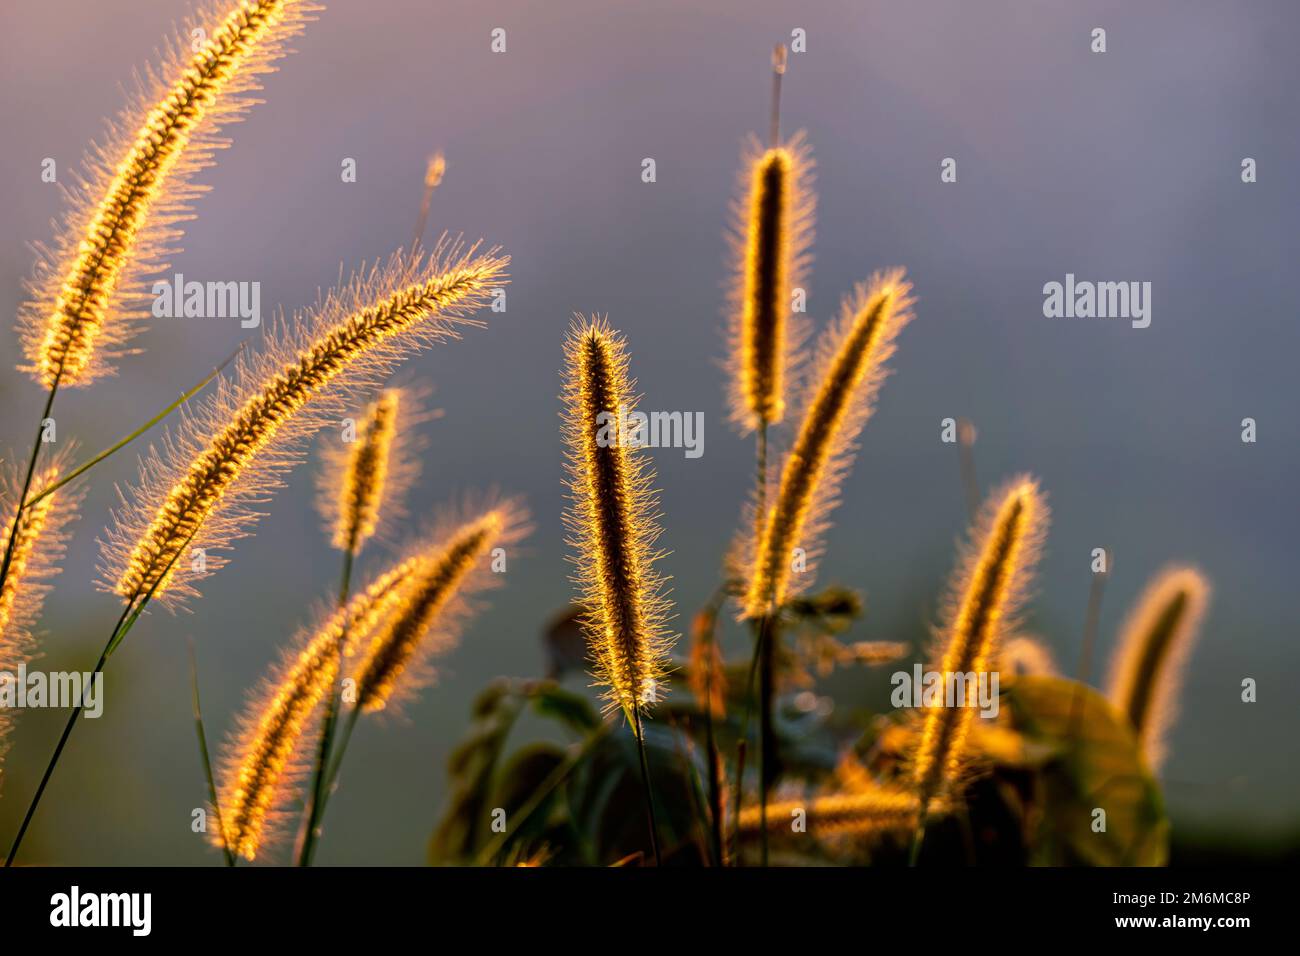 The sun hits the grass. The flower has a light orange shade from the sun. Stock Photo